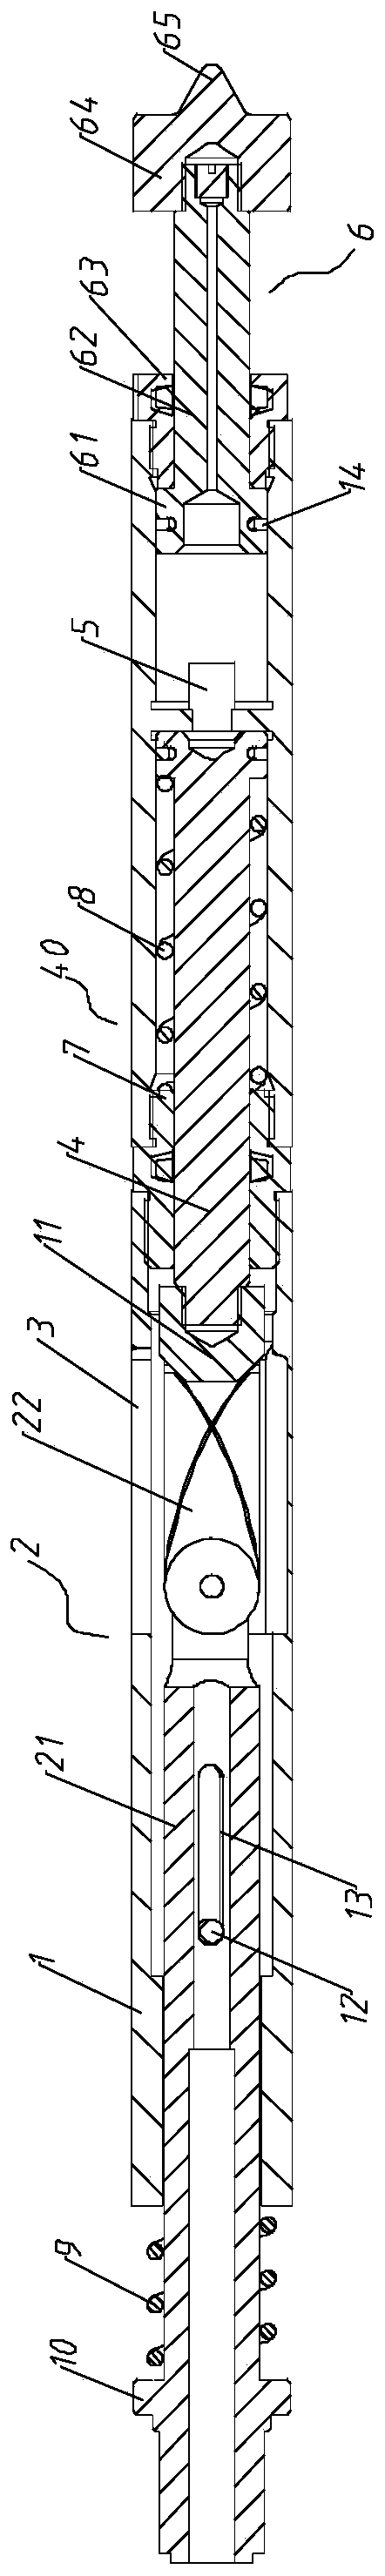 Rock cracking drill bit and method for releasing rock stress